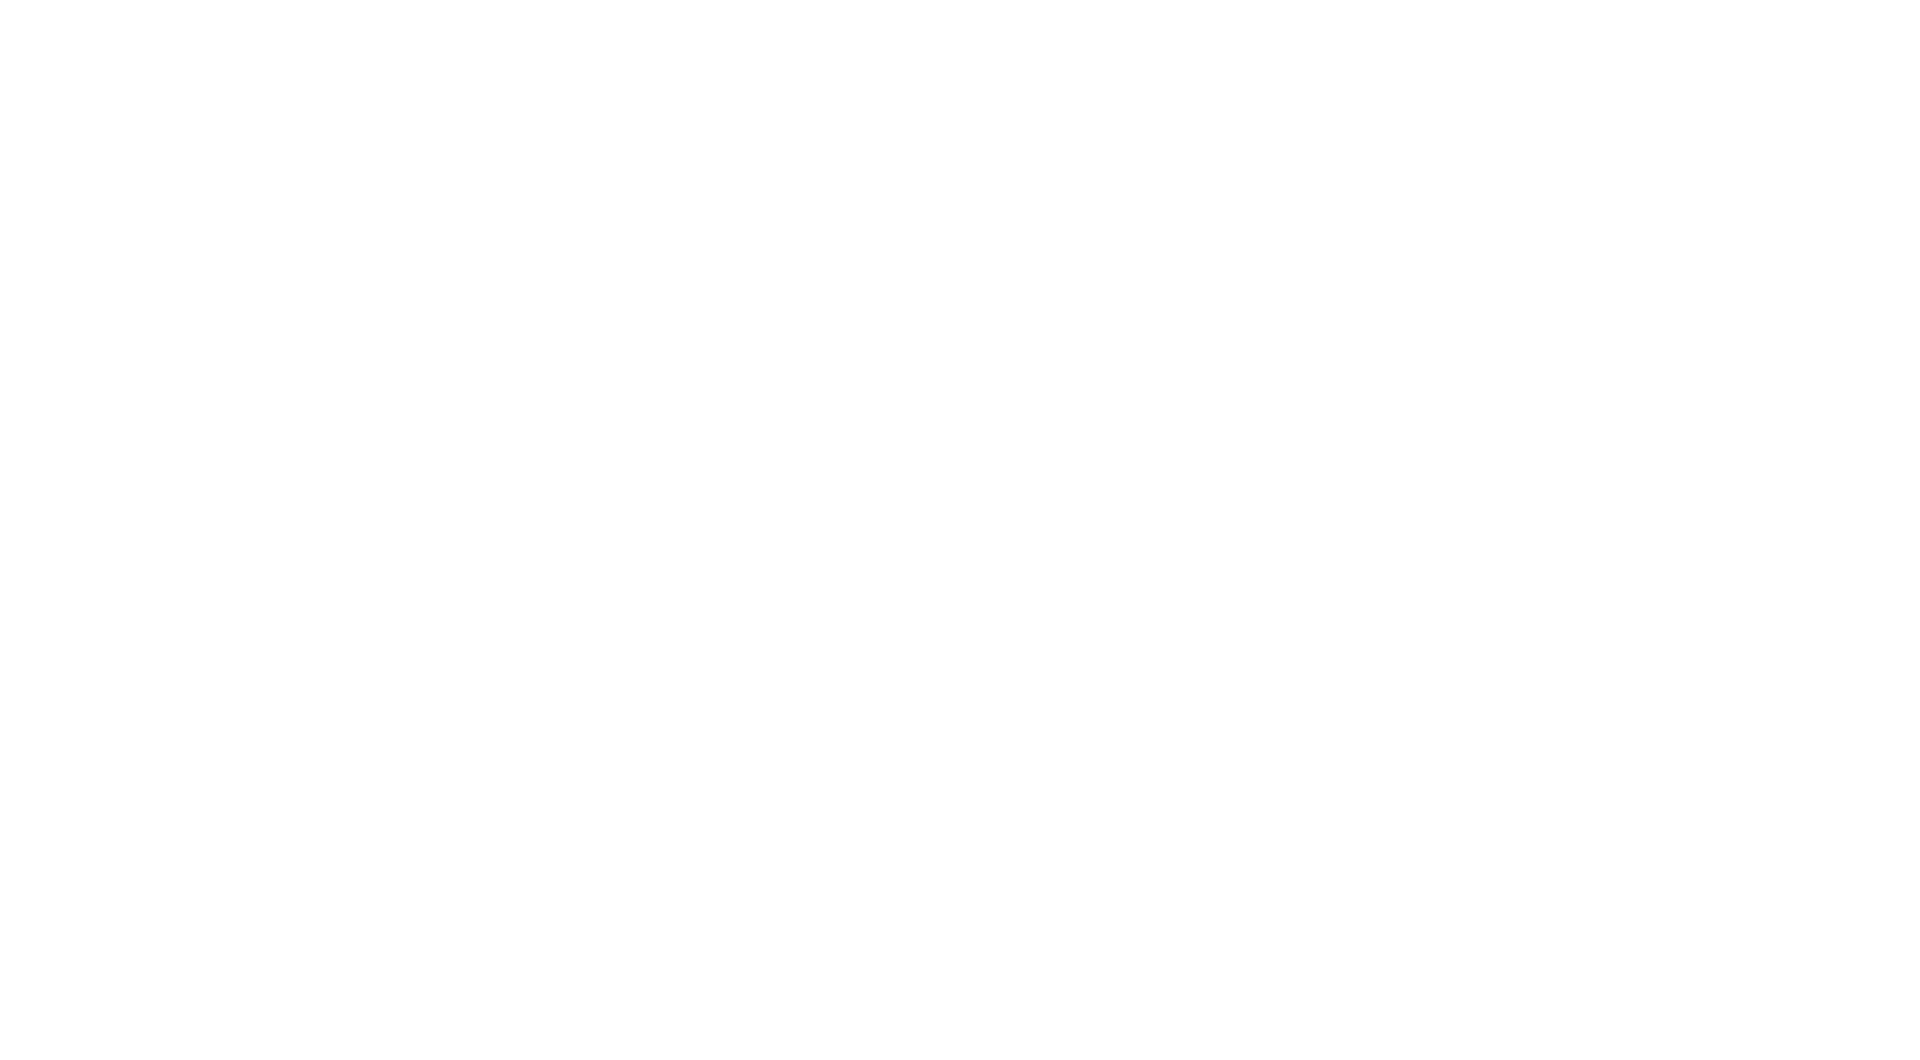 Area Agency on Aging of East Texas logo